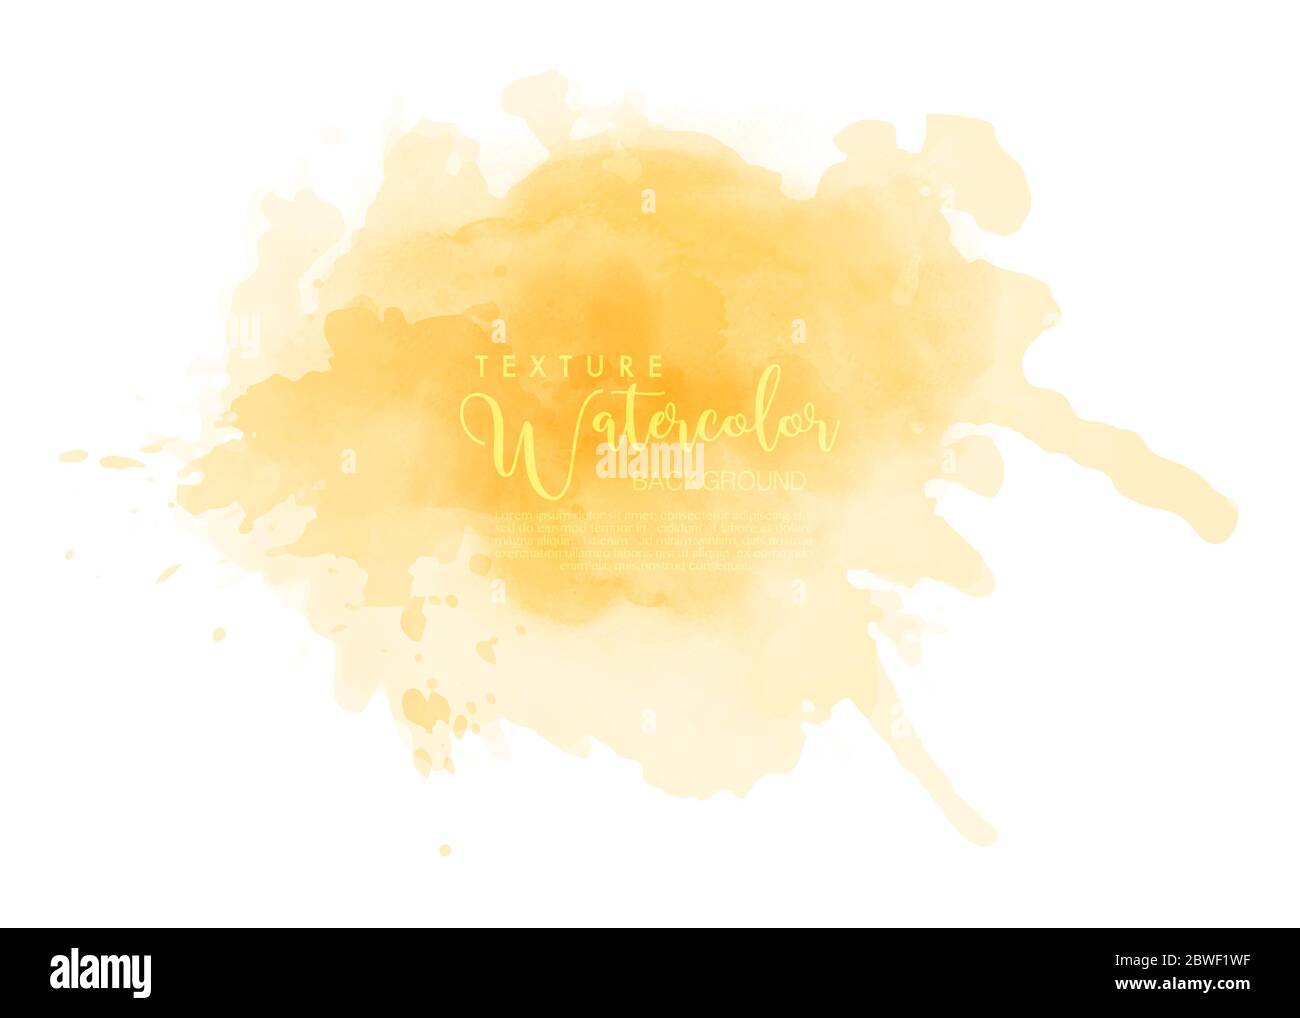 Abstract isolated yellow watercolor splash. Stain artistic vector used as being an element in the decorative design of invitation, cards, cover or ban Stock Vector